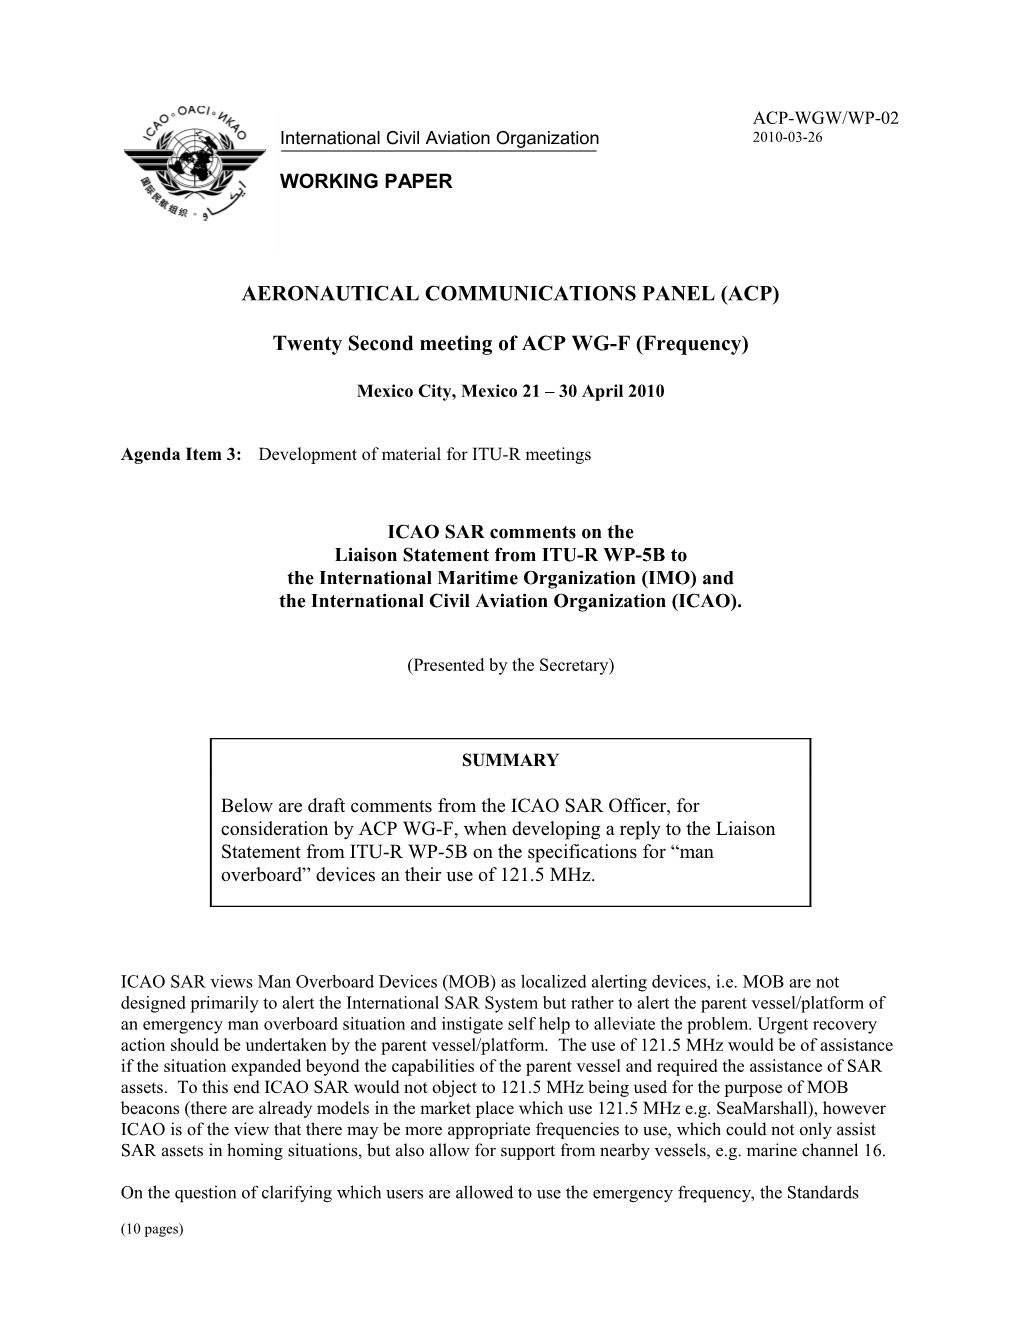 ICAO SAR Comments on the Liaison Statement from ITU-R WP-5B to the International Maritime